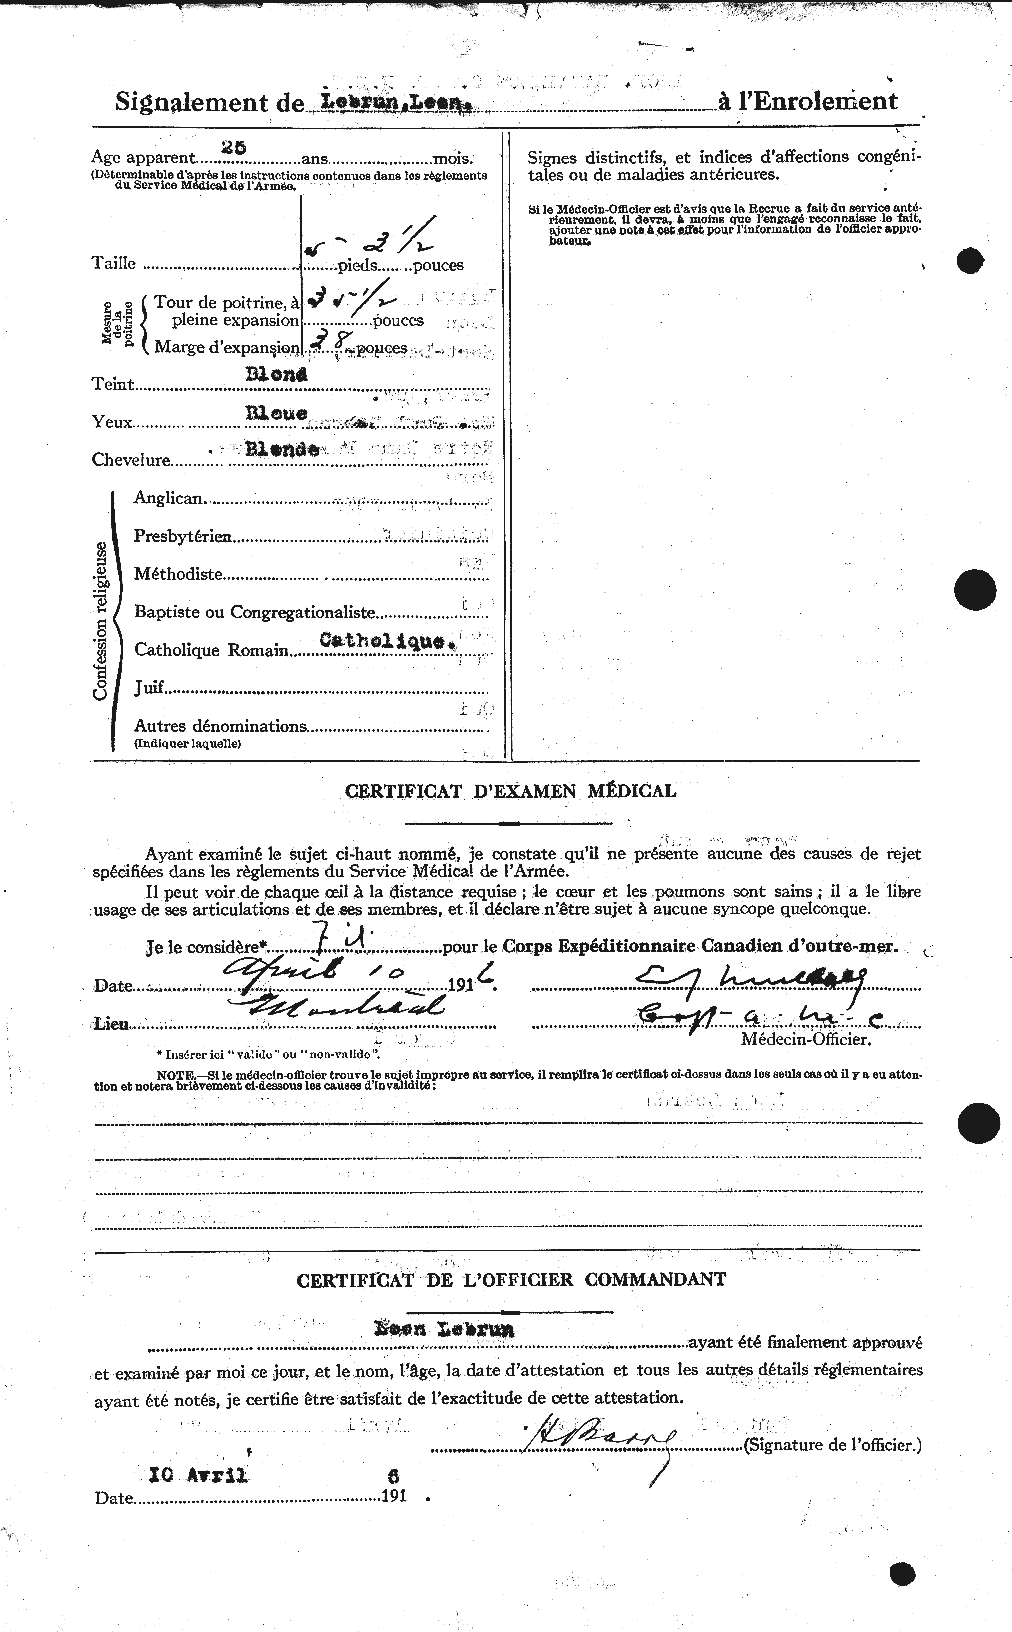 Personnel Records of the First World War - CEF 461578b